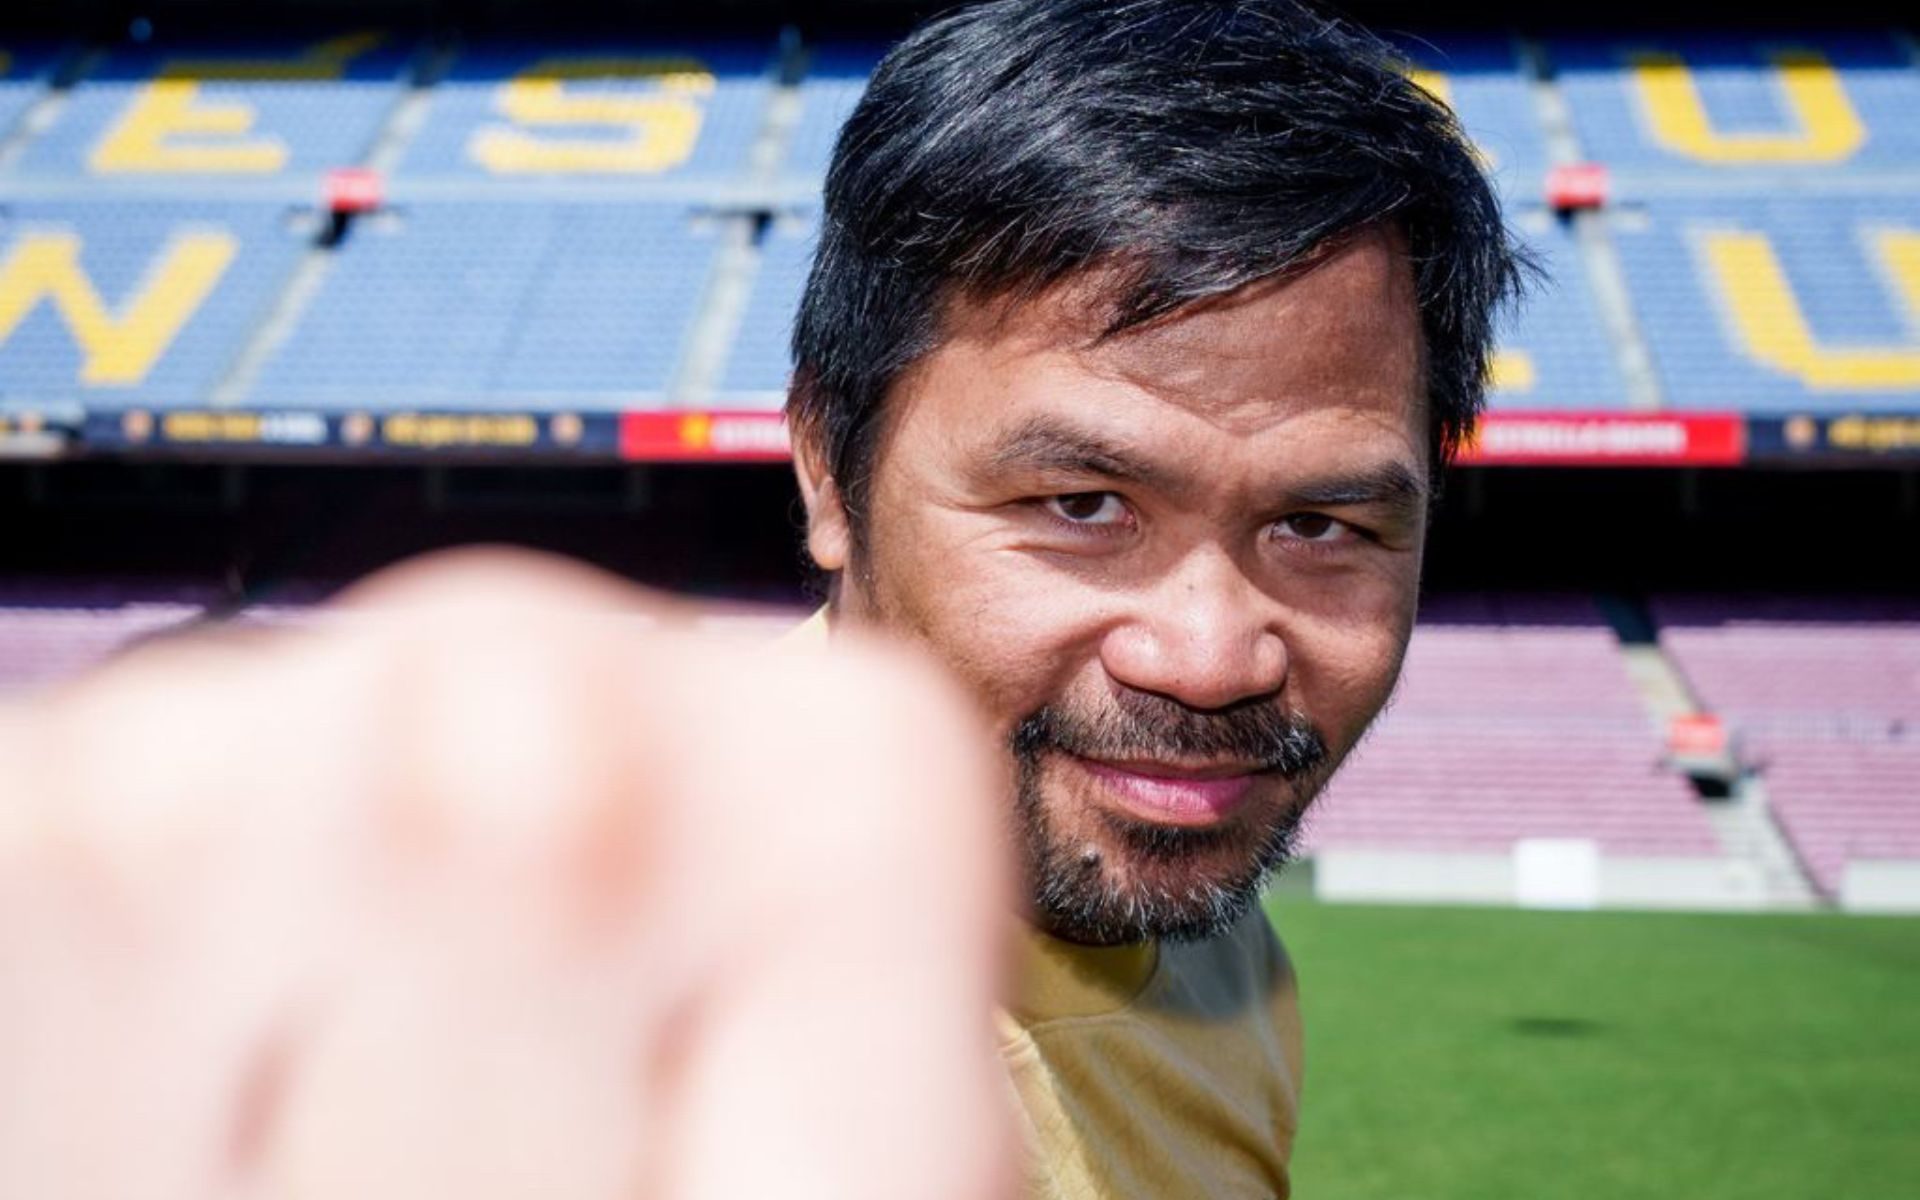 Manny Pacquiao returns with exhibition bout versus Korean YouTuber DK Yoo